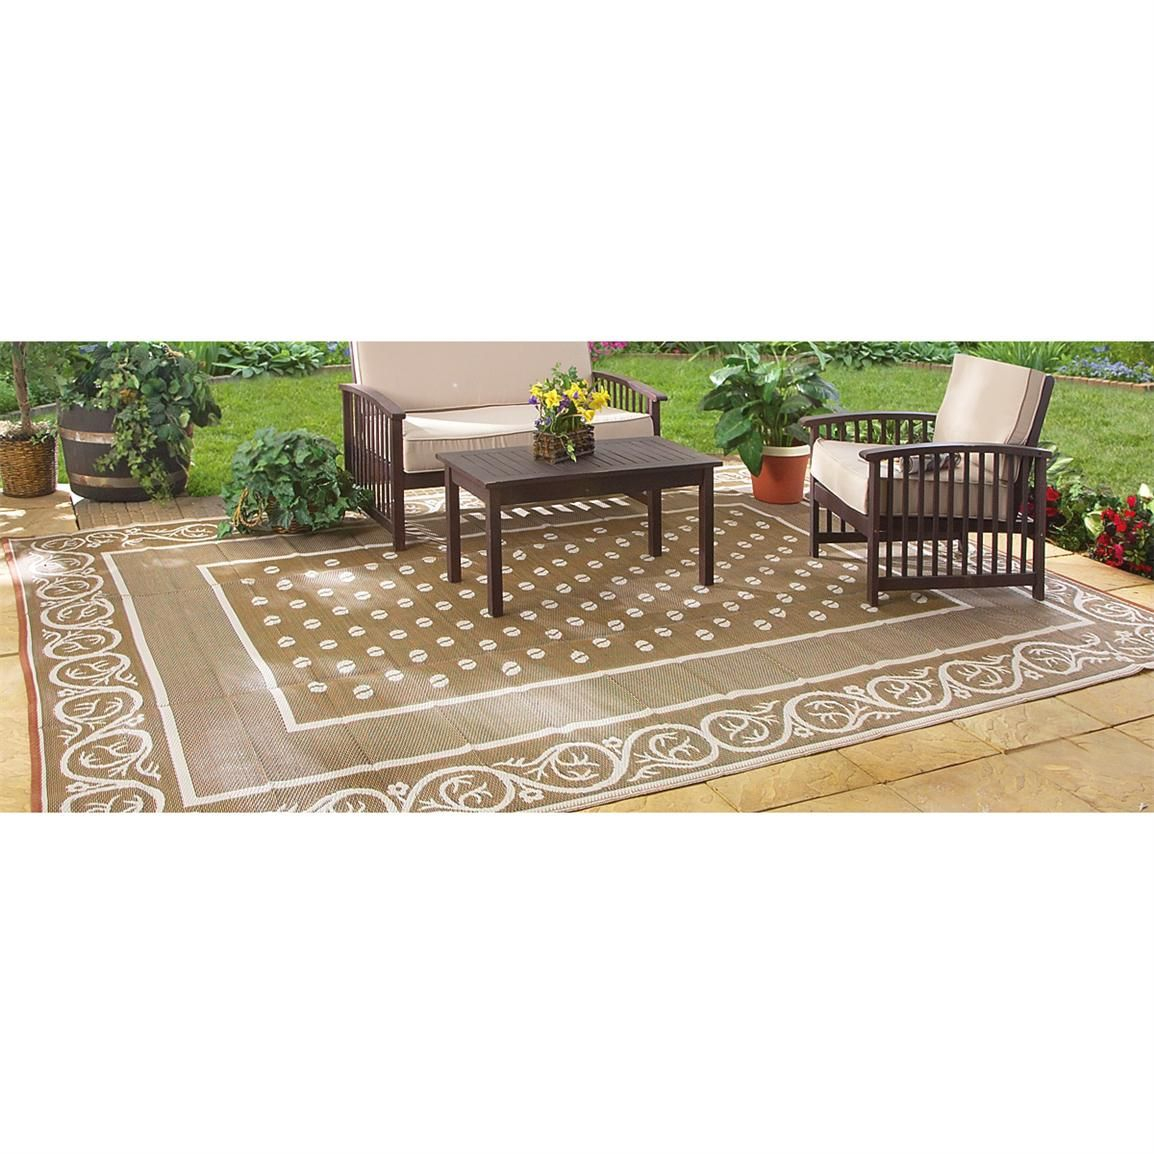 Details About Reversible Mats 119127 Outdoor Patio 9 Feet X 12 Feet intended for sizing 1154 X 1154